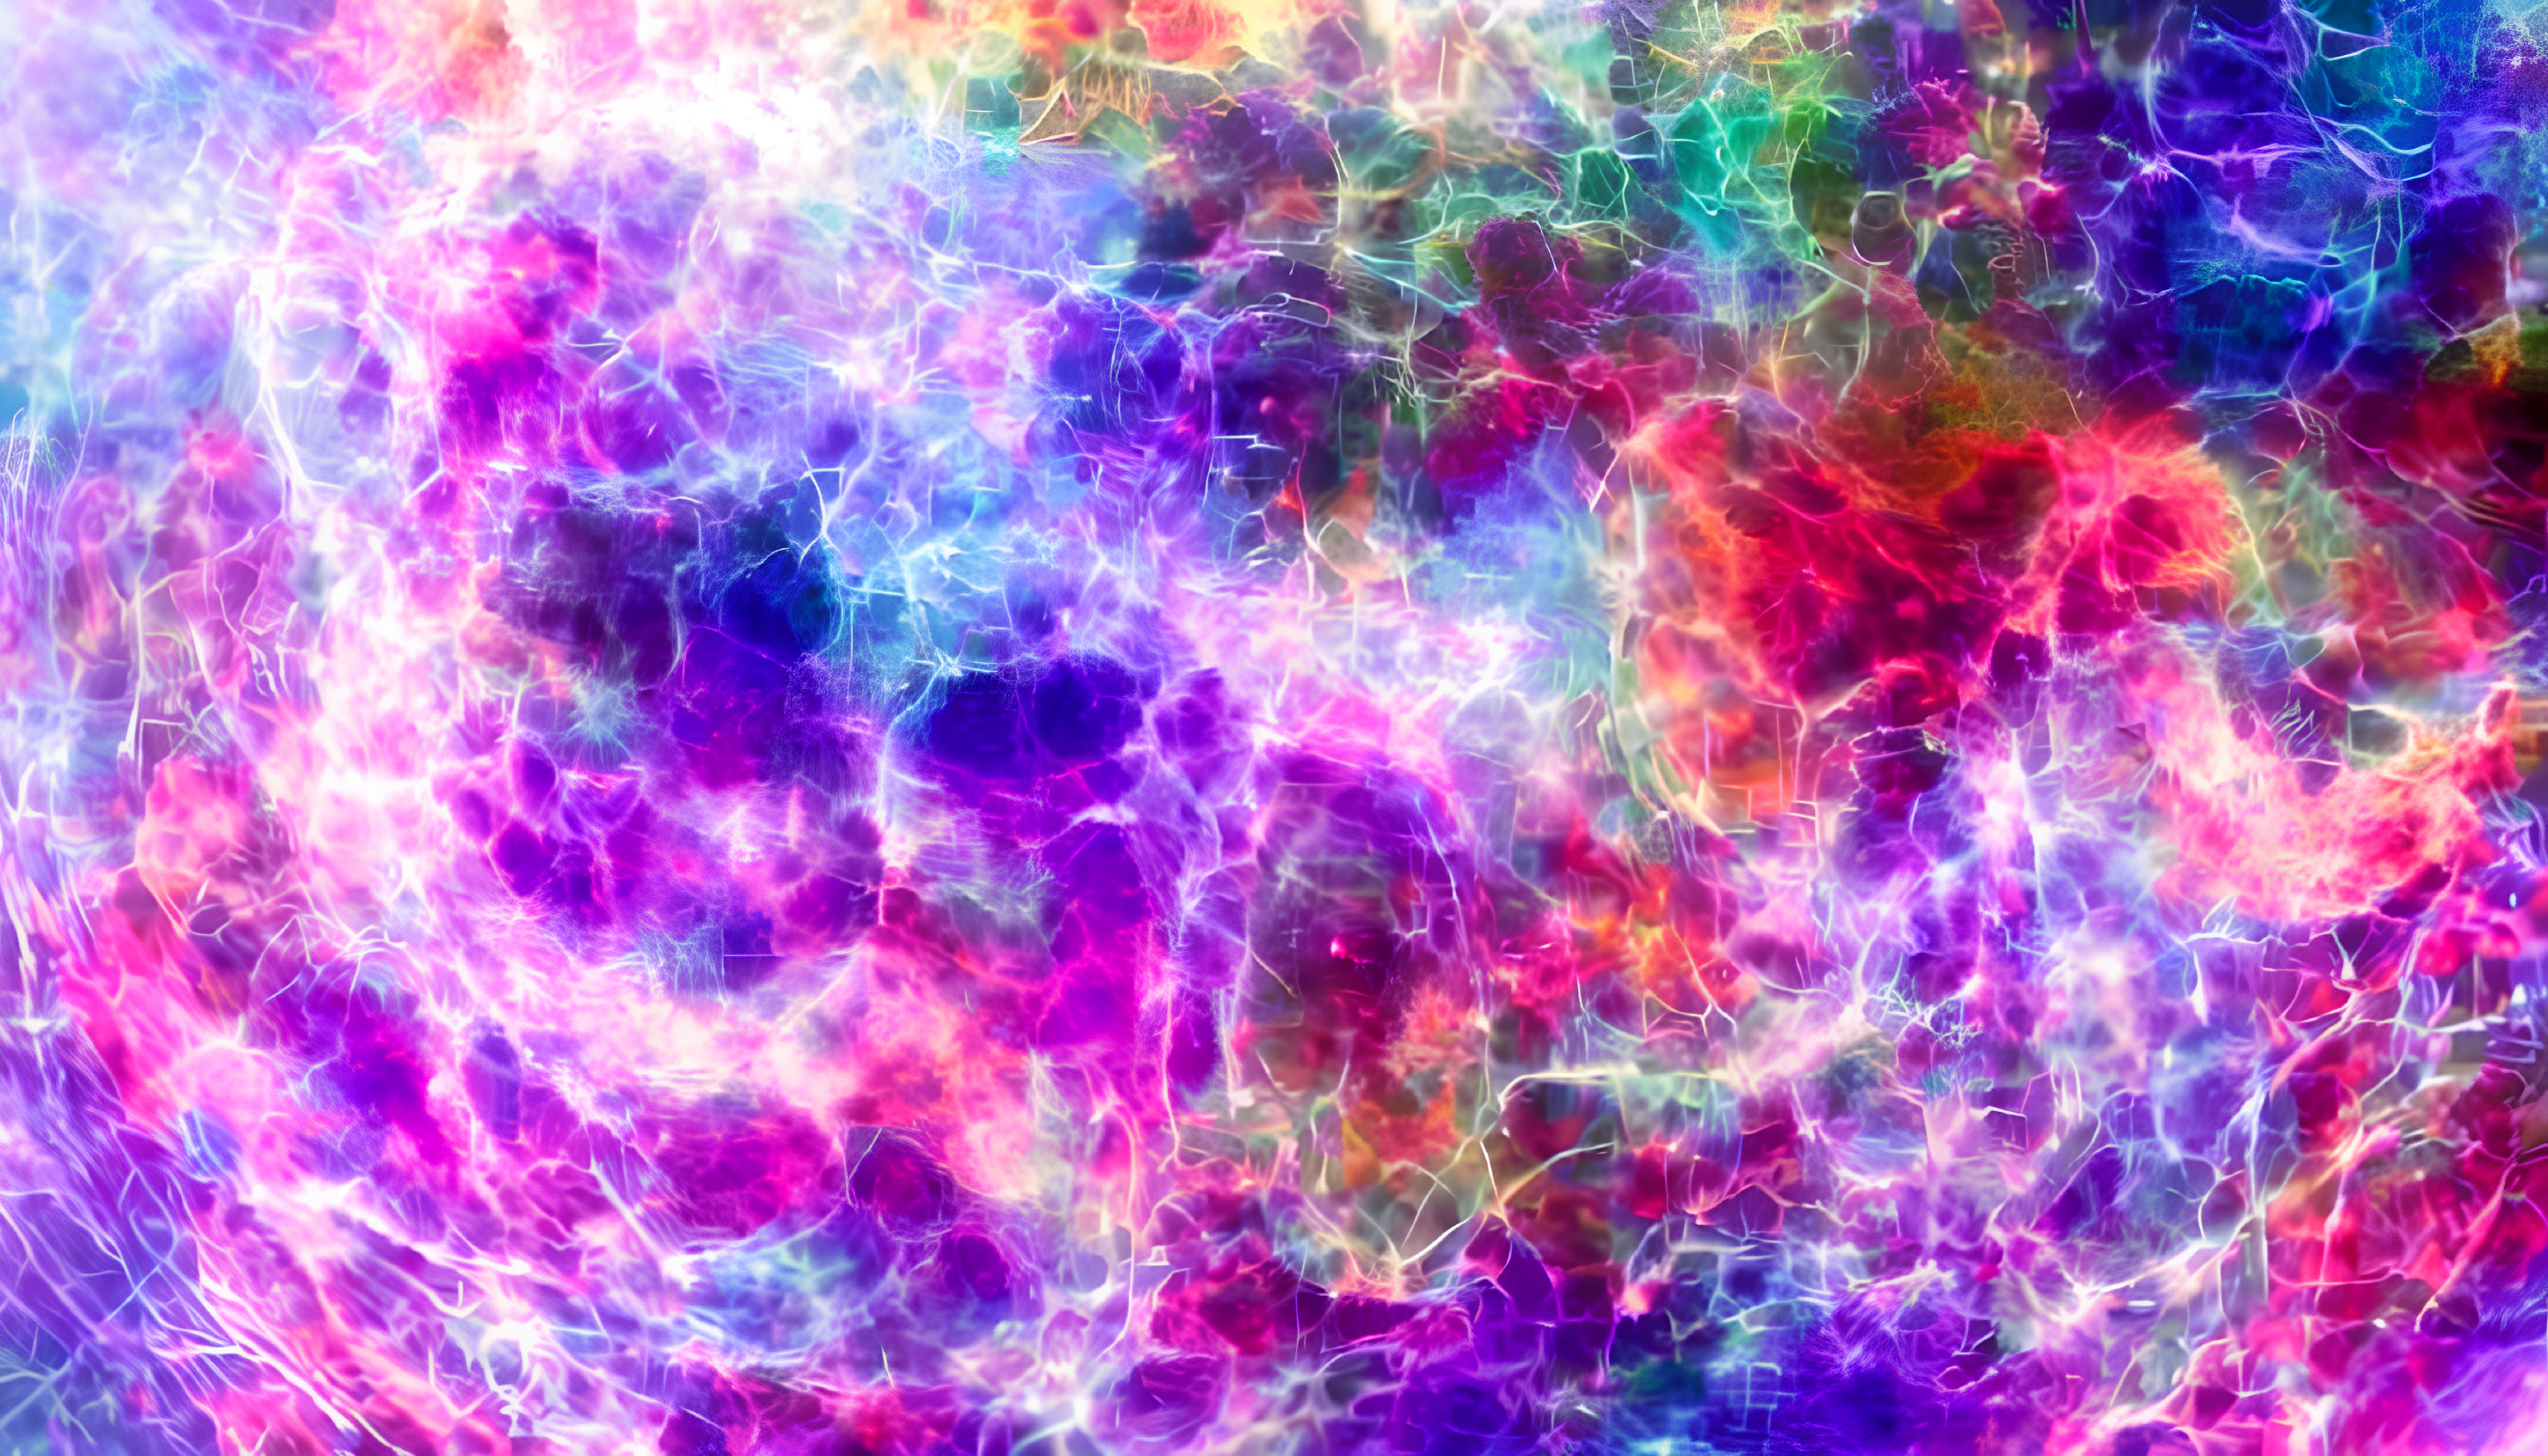 Colorful Abstract Art: Purple, Blue, and Pink Swirls with Cosmic Nebula Vibes